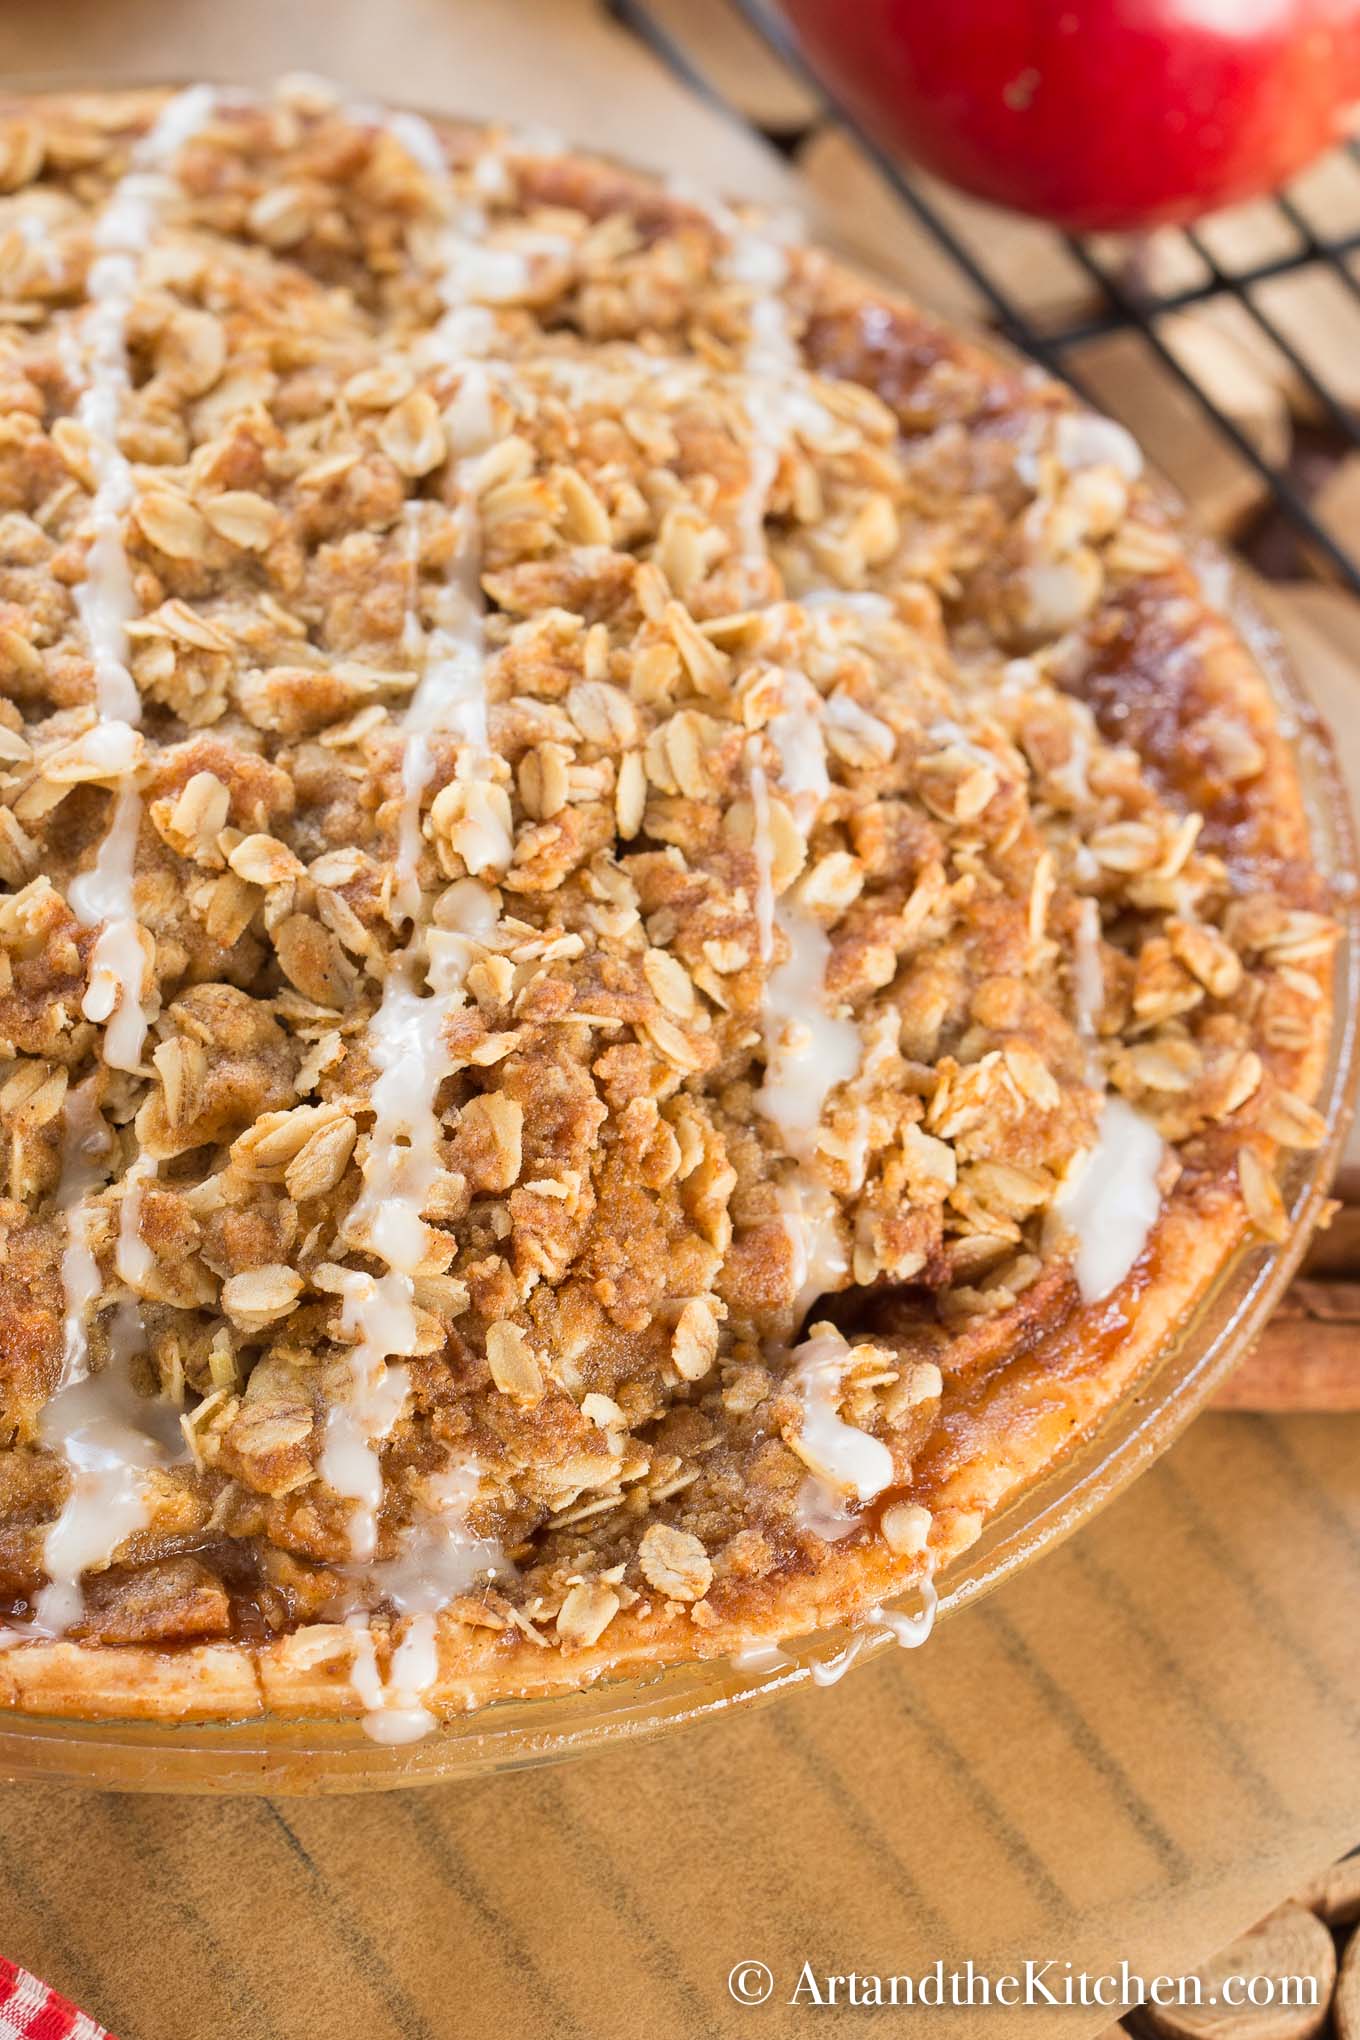 Apple pie with crunchy oatmeal crisp topping drizzled with icing.